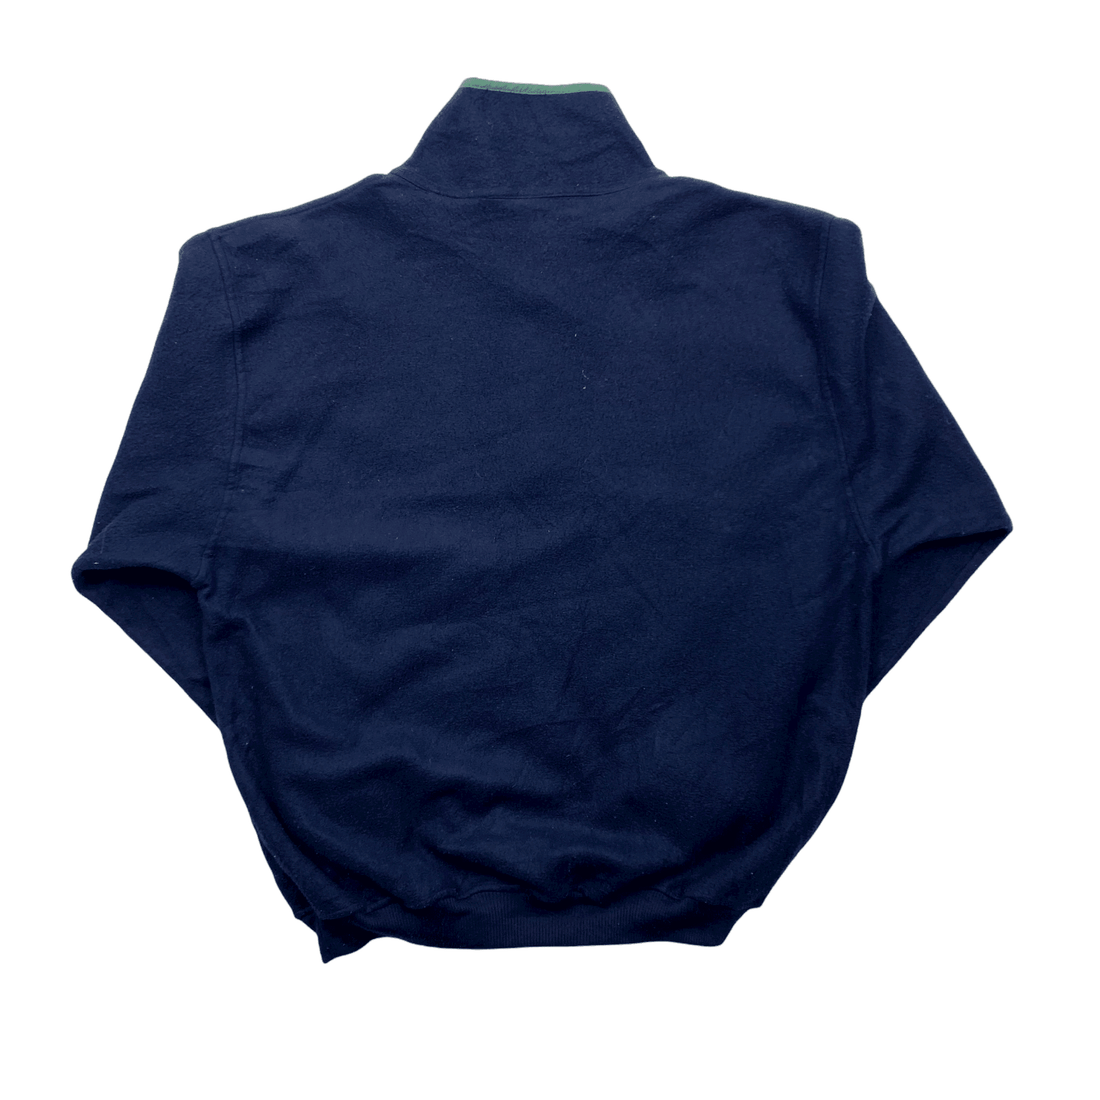 Vintage 90s Navy Blue Adidas Spell-Out Quarter Button Fleece - Large - The Streetwear Studio